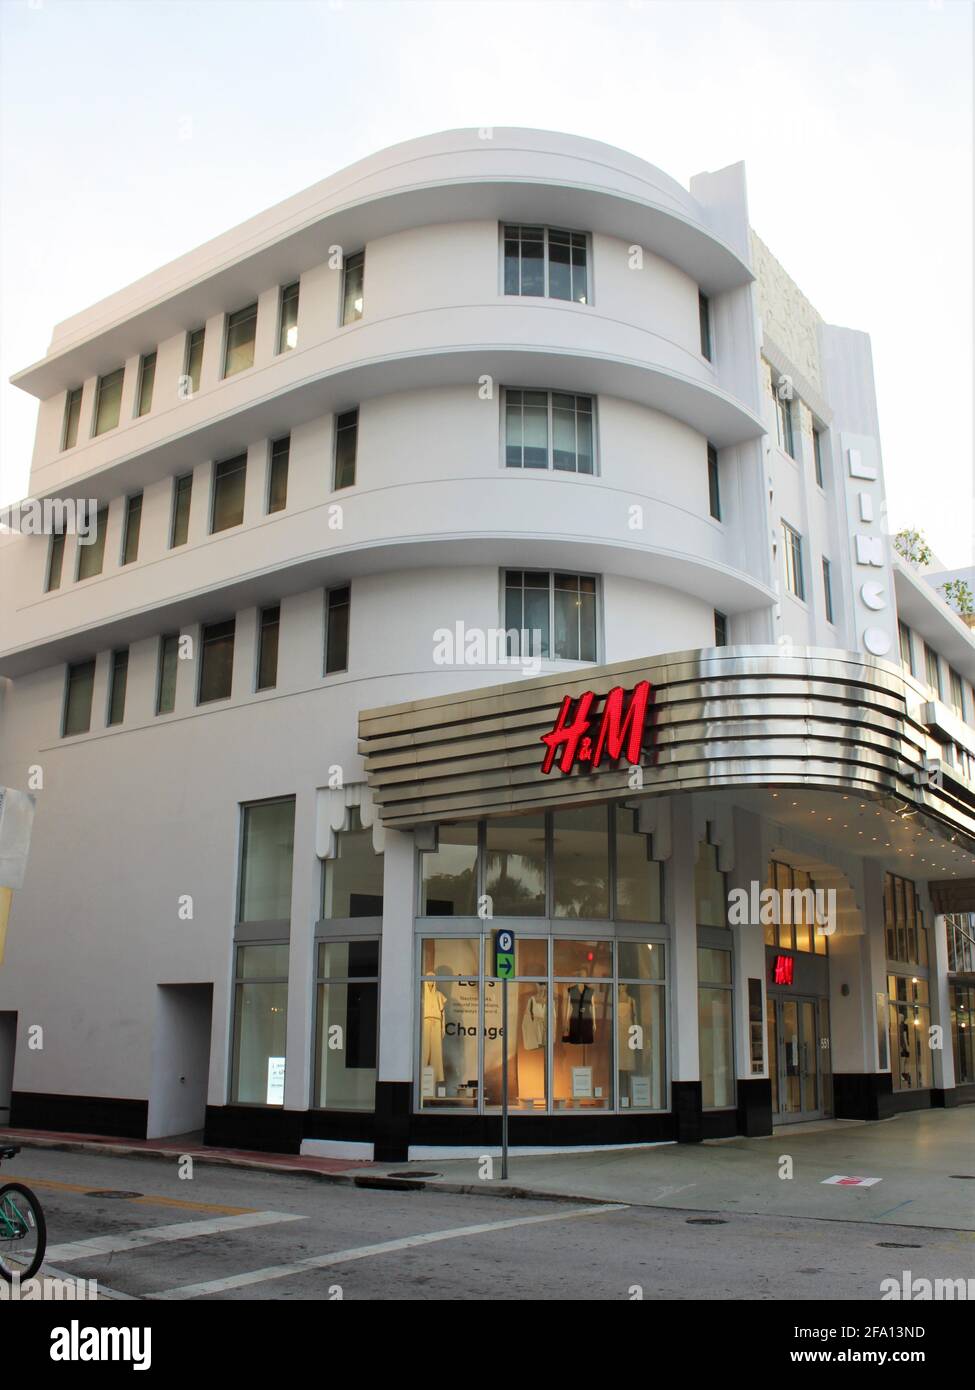 Facade of Lincoln Theatre on Lincoln Road Mall in Miami Beach Florida. Also has HM clothing store underneath, a Swedish multinational chain of clothes Stock Photo